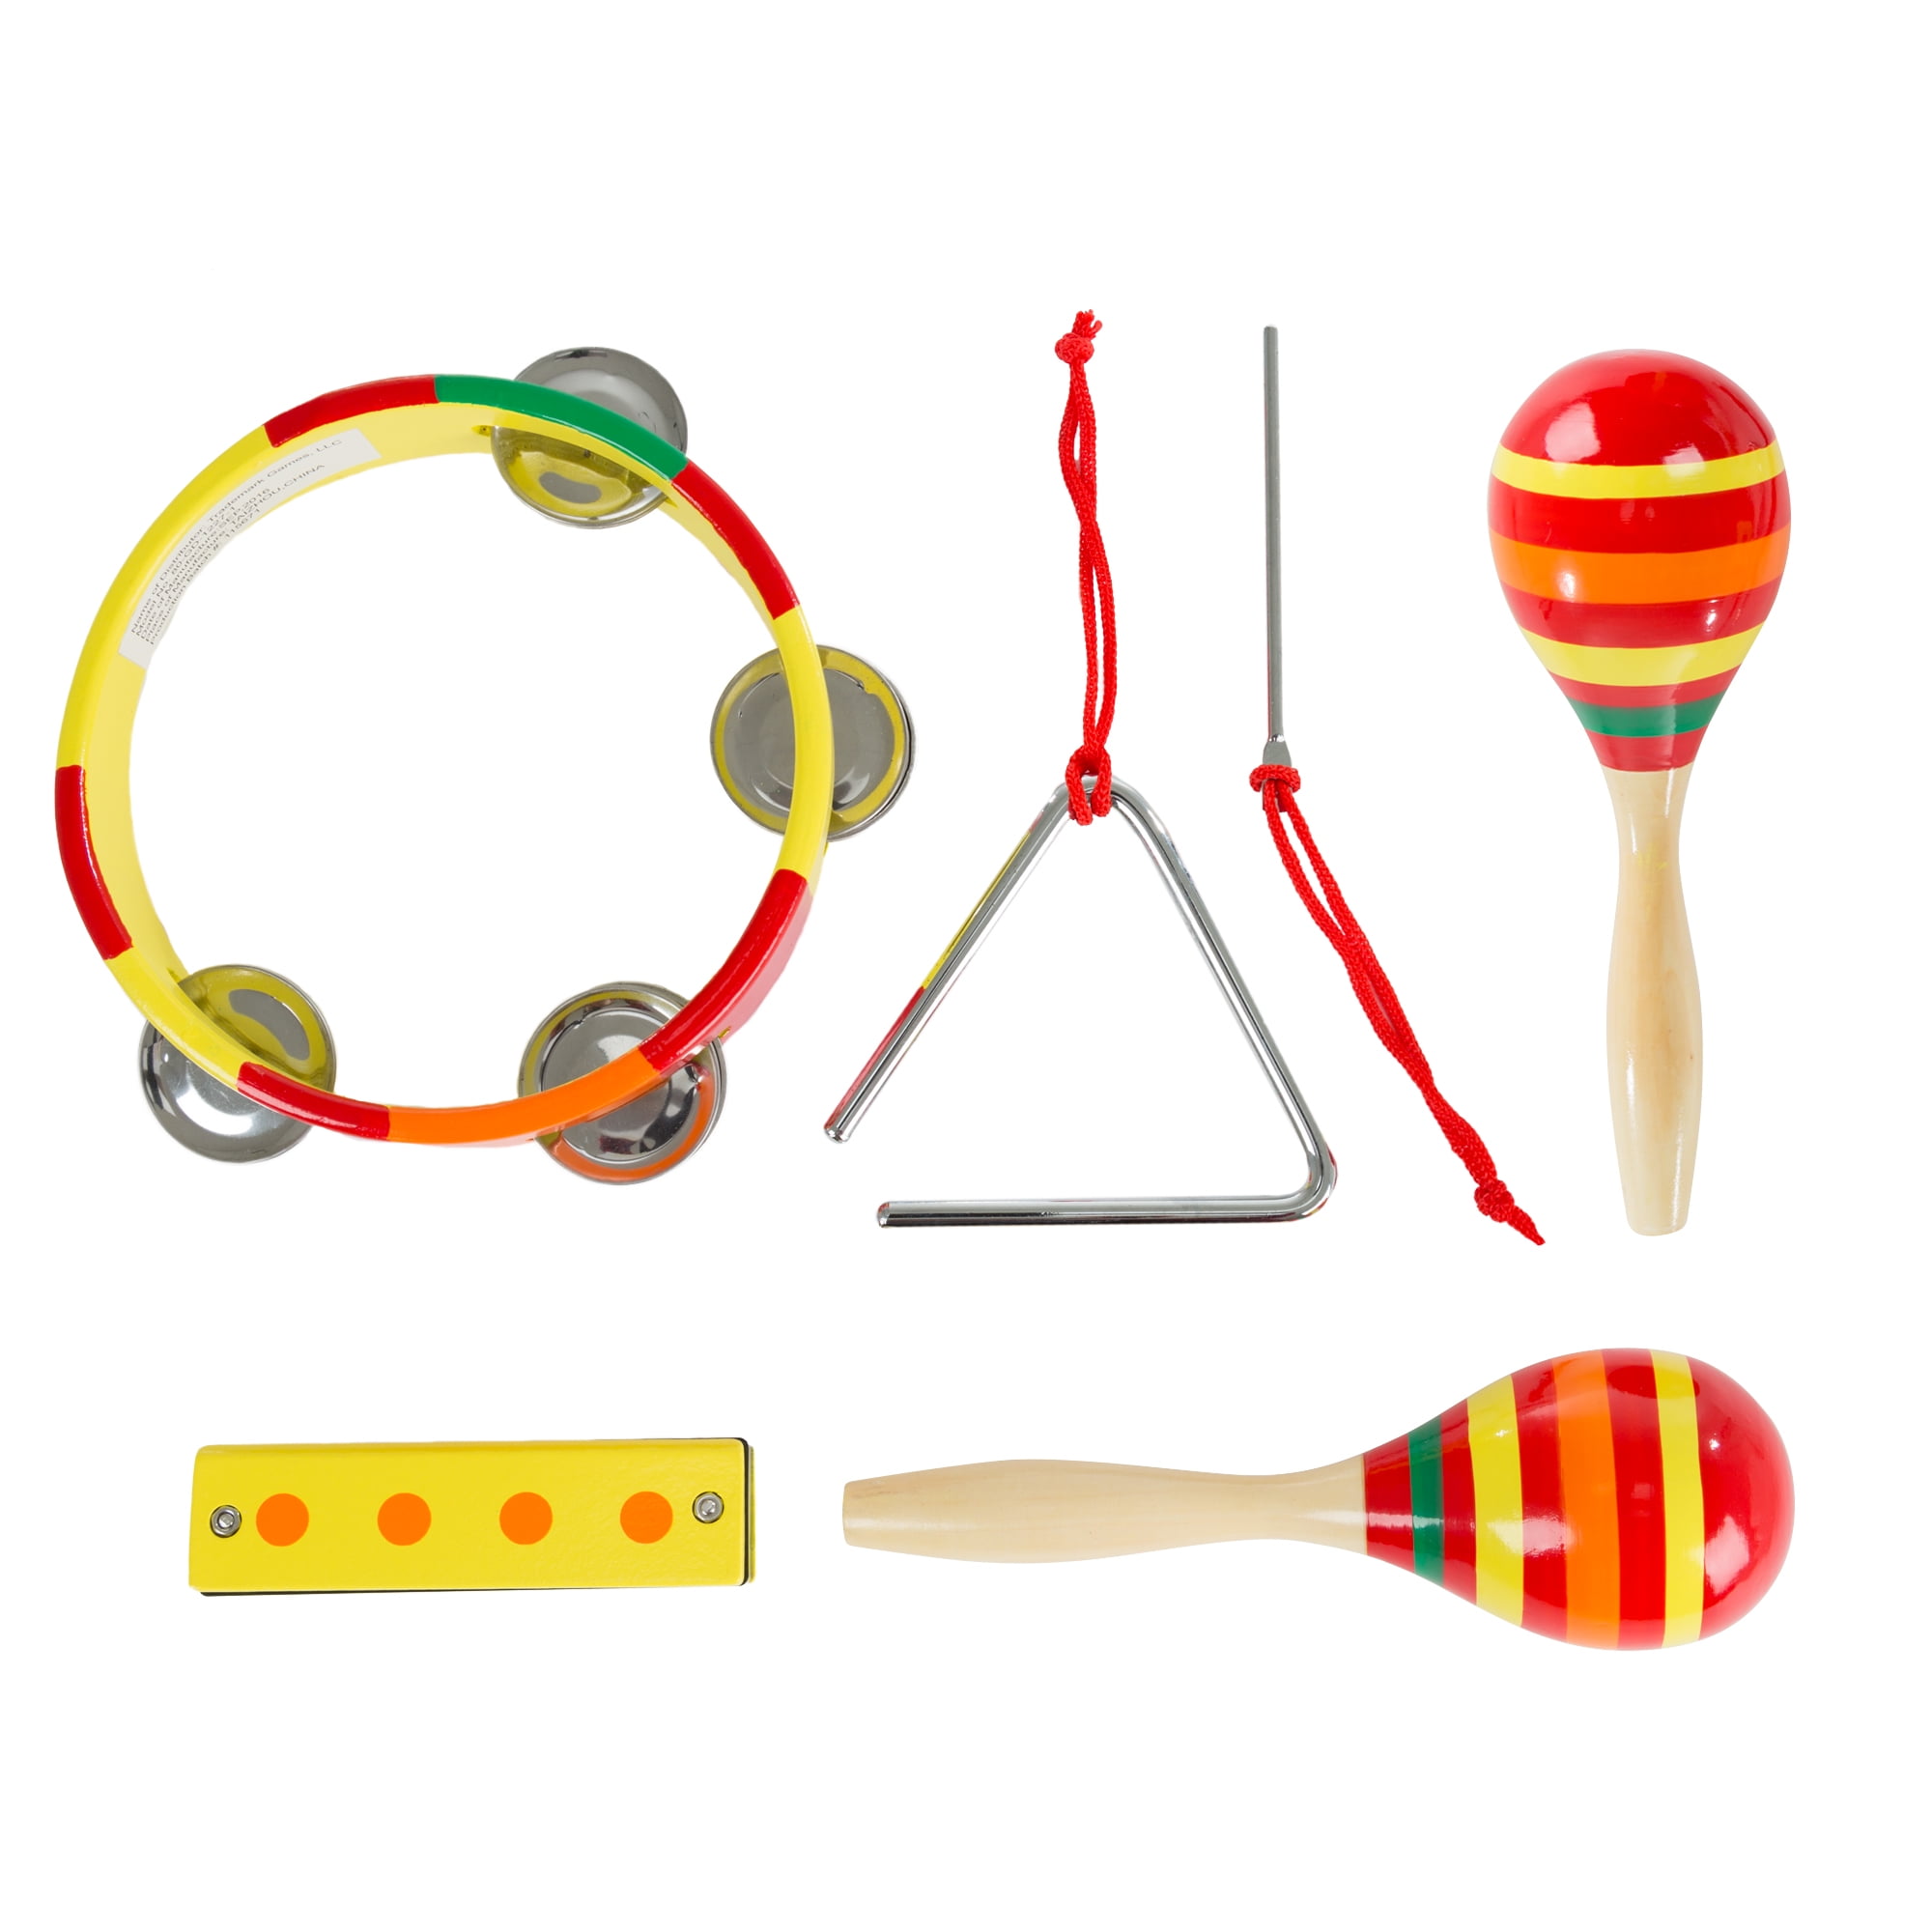 Children, free play, & 60 homemade musical instruments! - Child's Play Music  